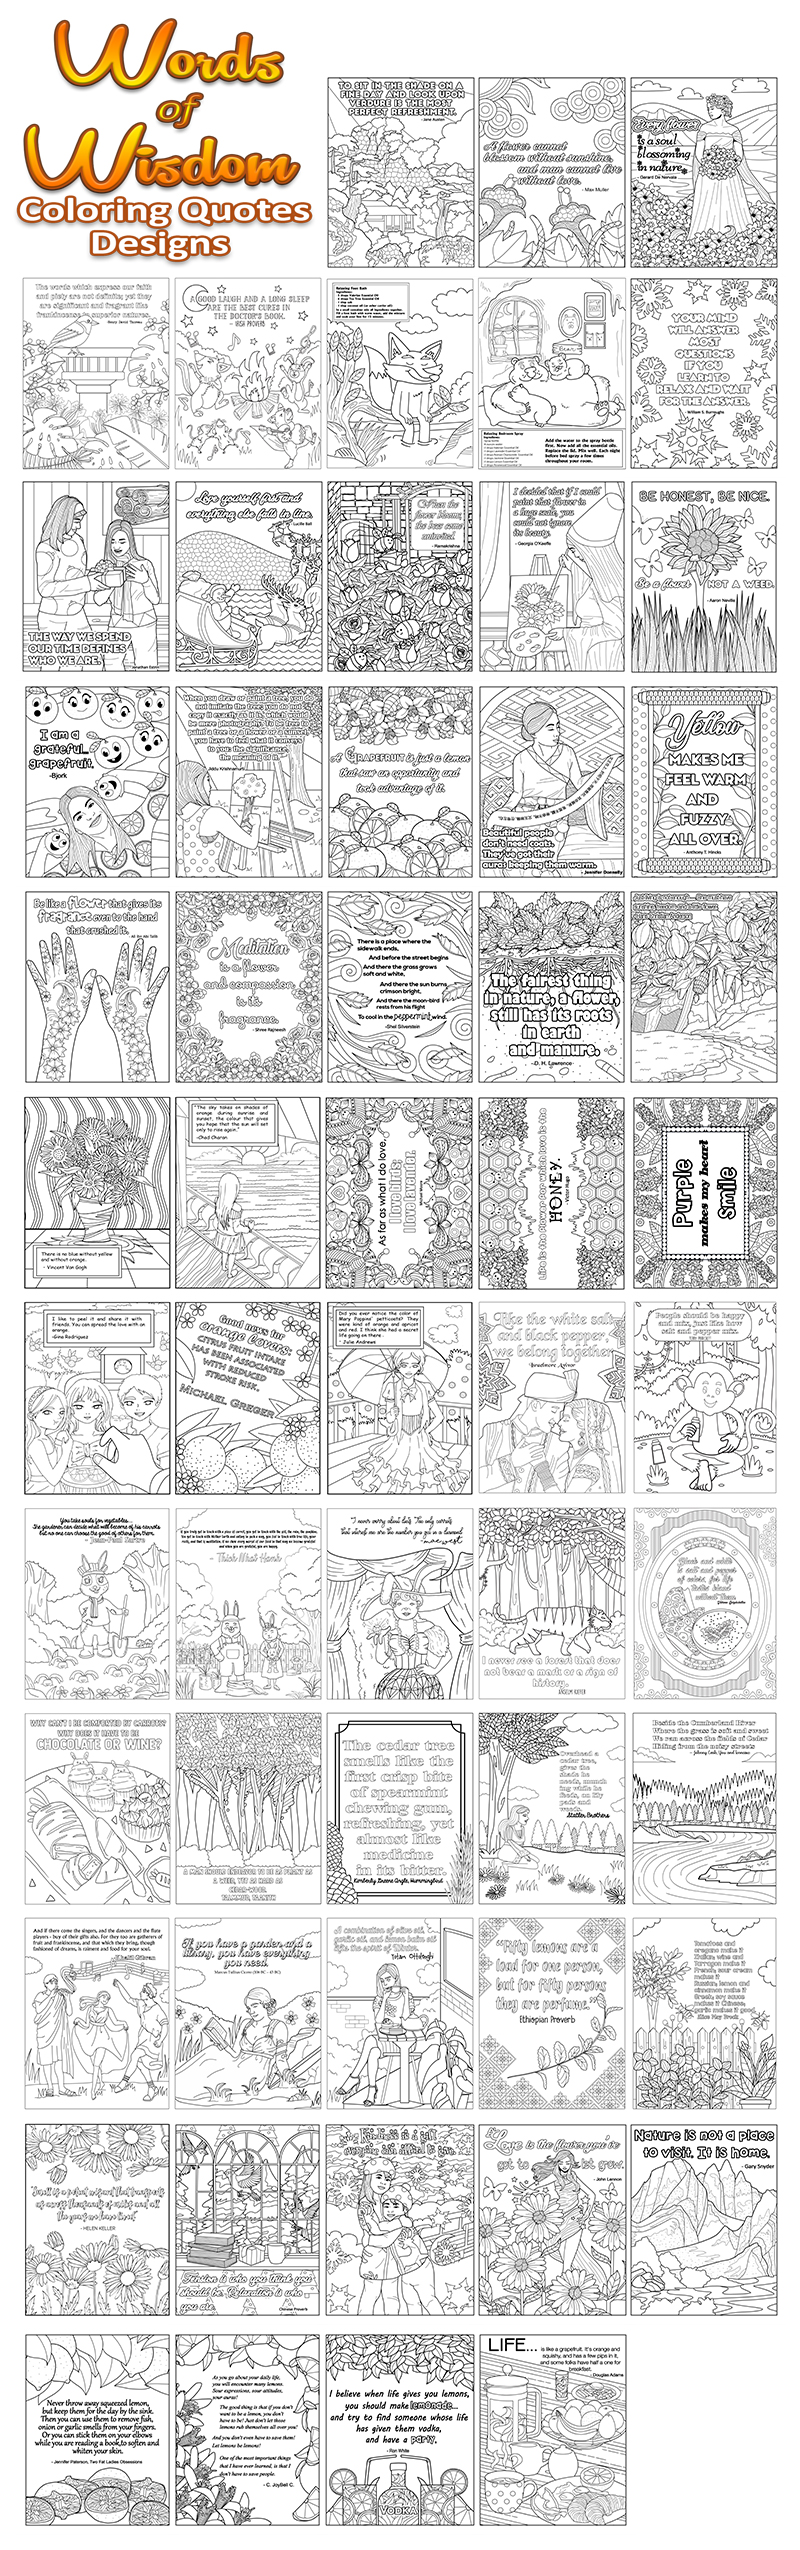 a complete image showing smaller images of all the coloring pages in a package about words of wisdom quotes